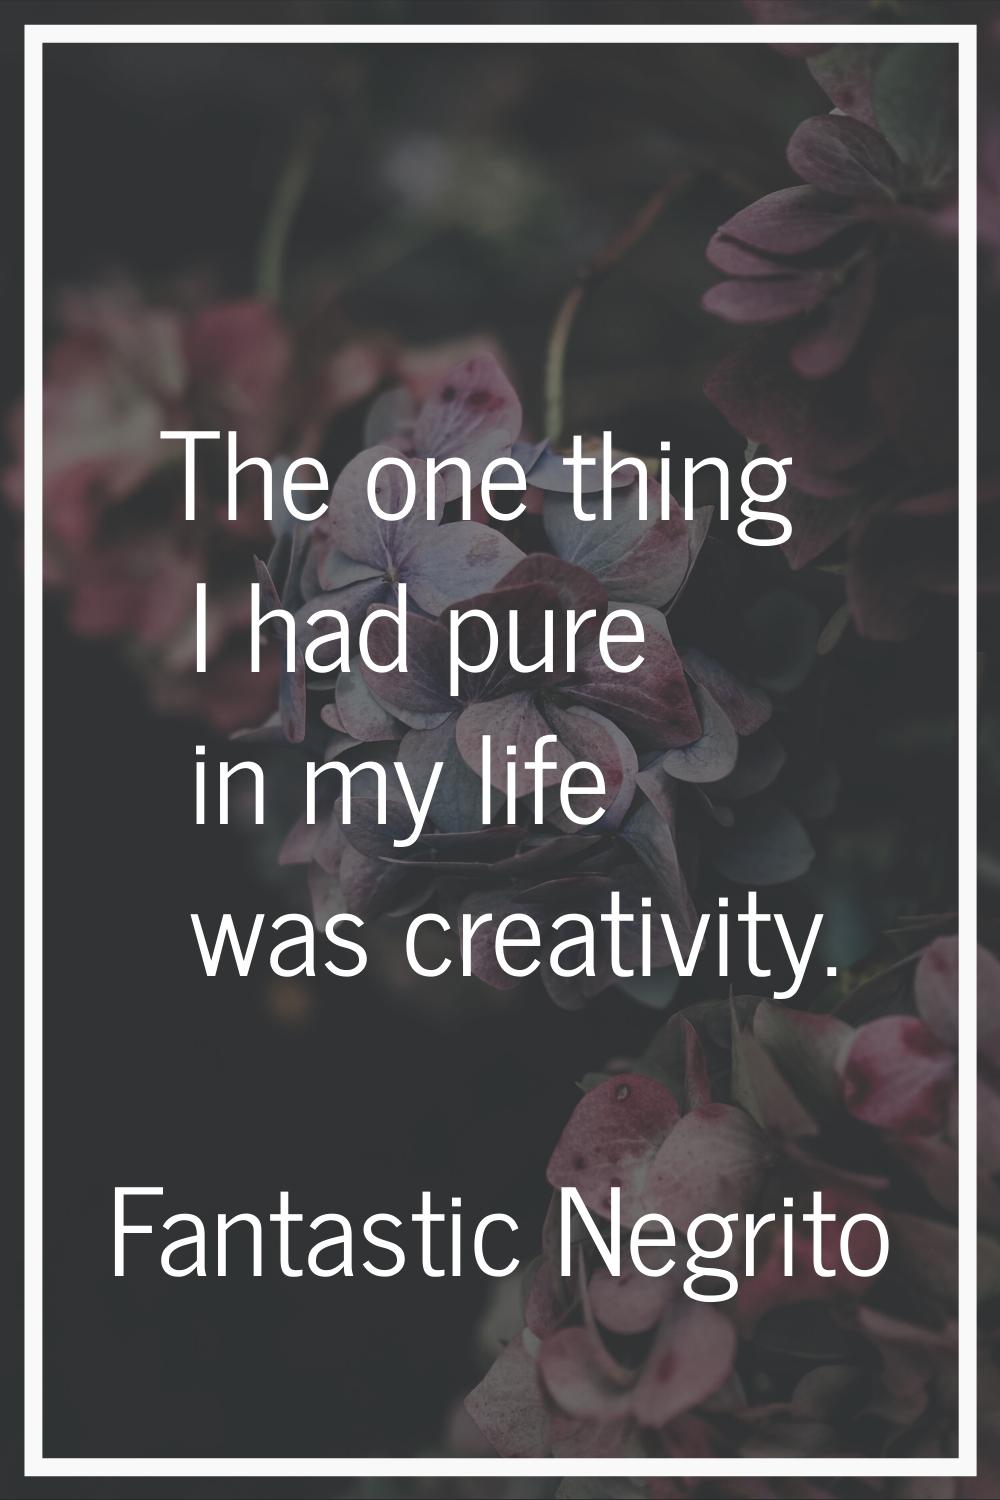 The one thing I had pure in my life was creativity.